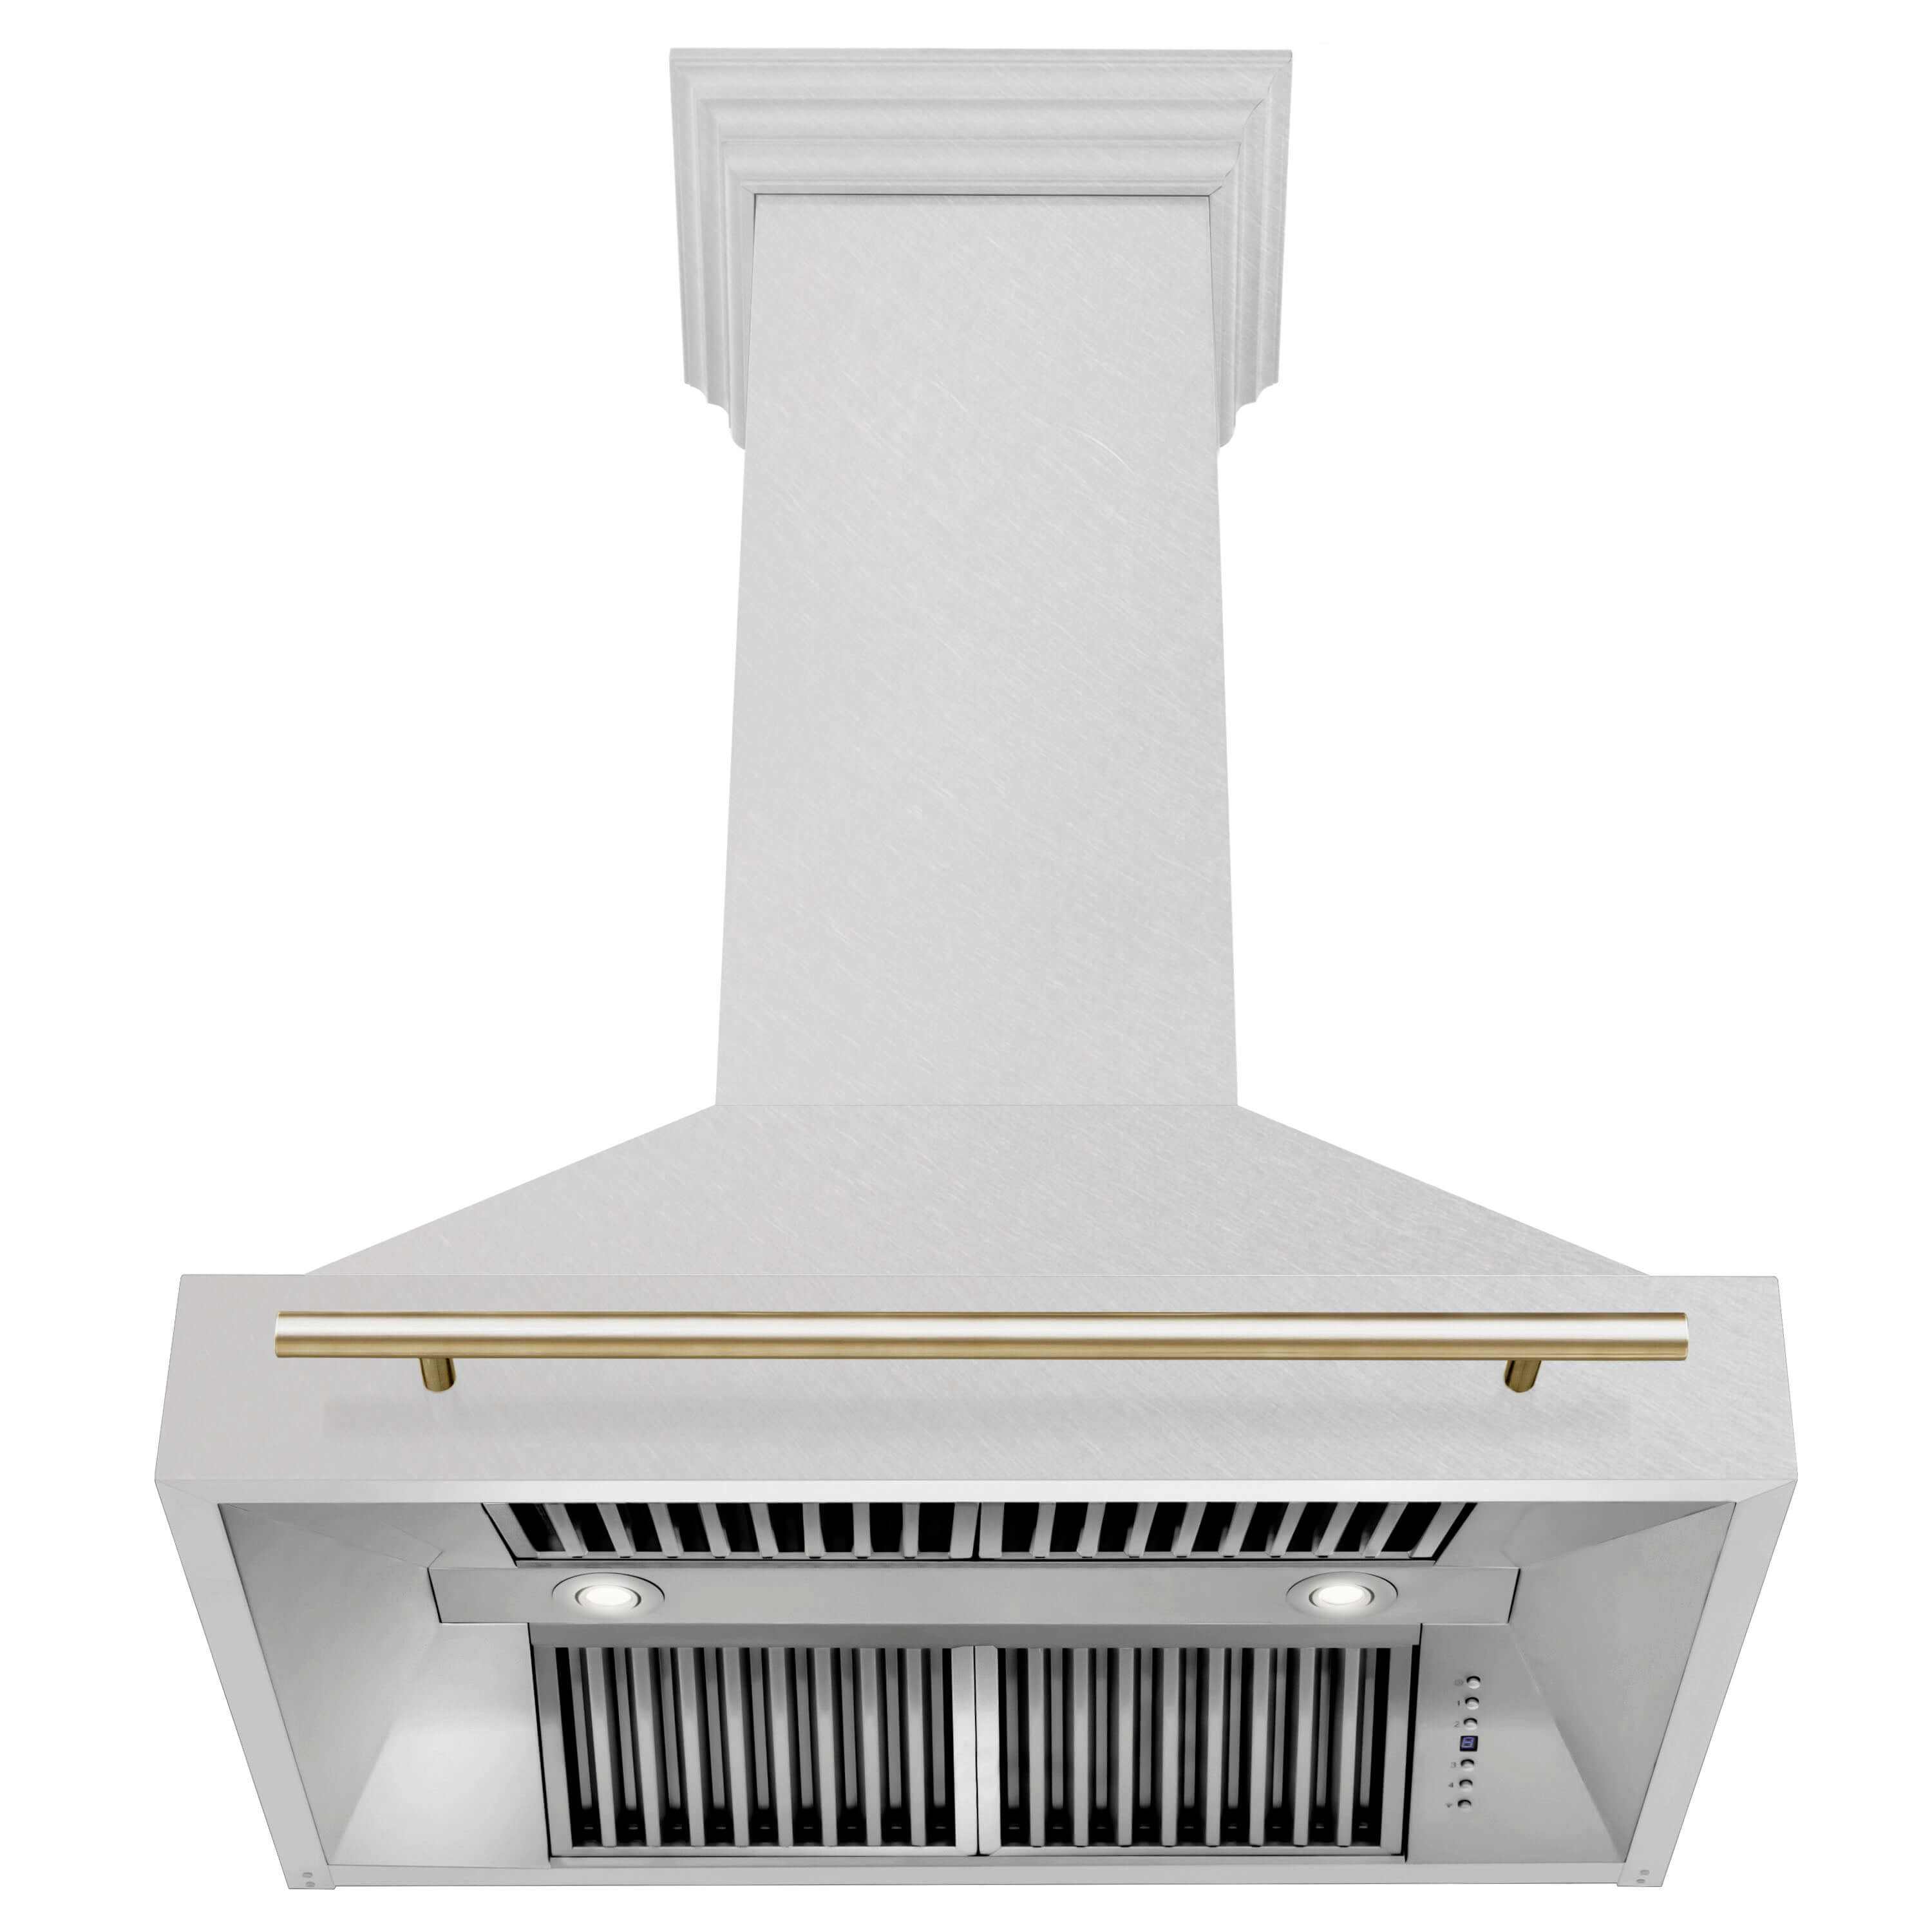 36 in. ZLINE Autograph Edition Wall Mount Range Hood with DuraSnow Stainless Steel Shell and Gold Handle Showing Baffle Filters